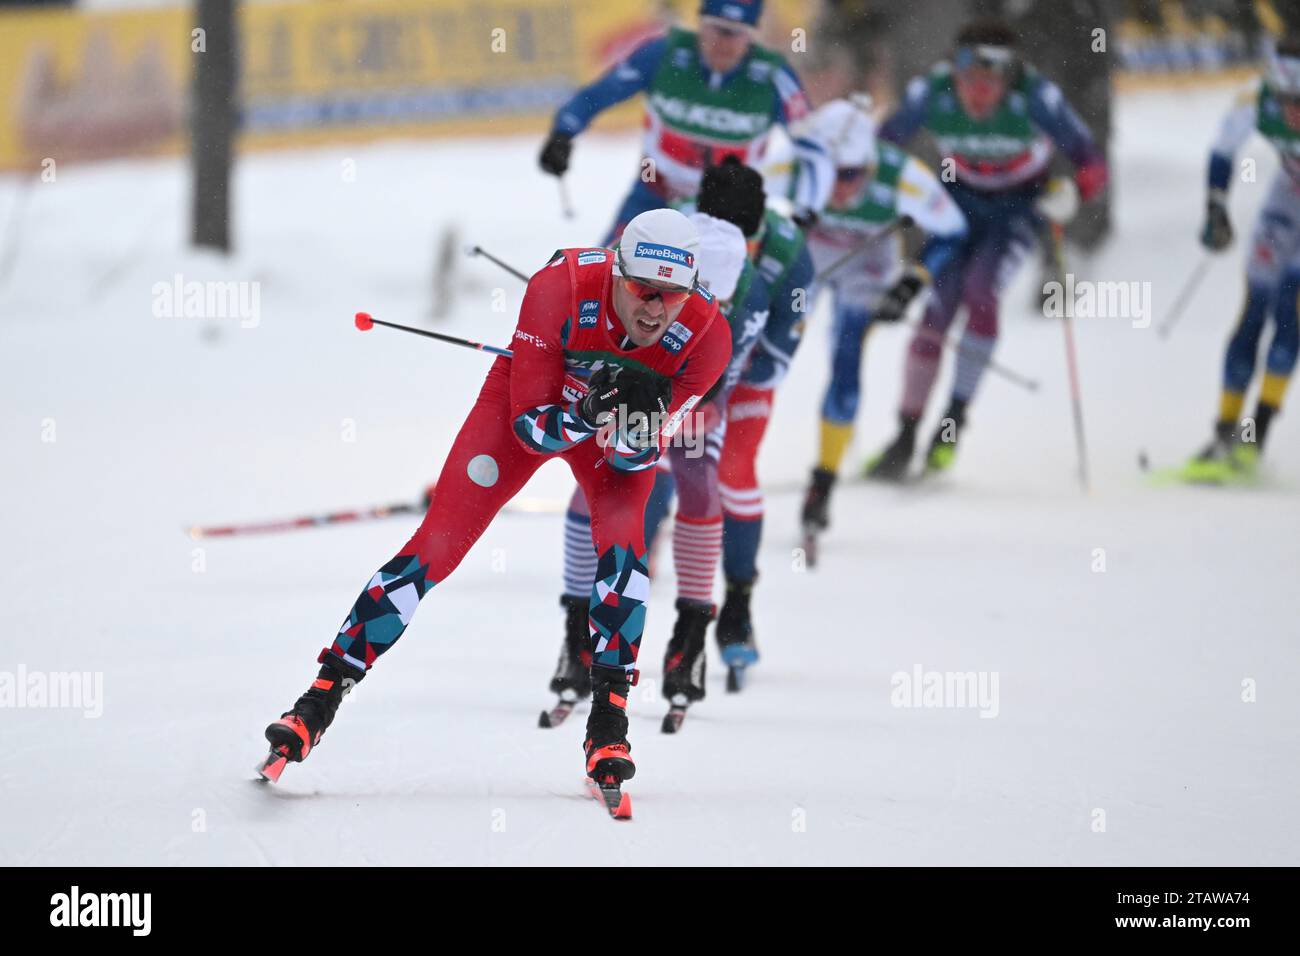 Paal Golberg of Norwayduring the Men's 4x7, 5 km relay at the FIS Cross-Country World Cup competitions in Gallivare, Sweden December 03, 2023. Photo: Ulf Palm/TT/kod 9110 Credit: TT News Agency/Alamy Live News Stock Photo